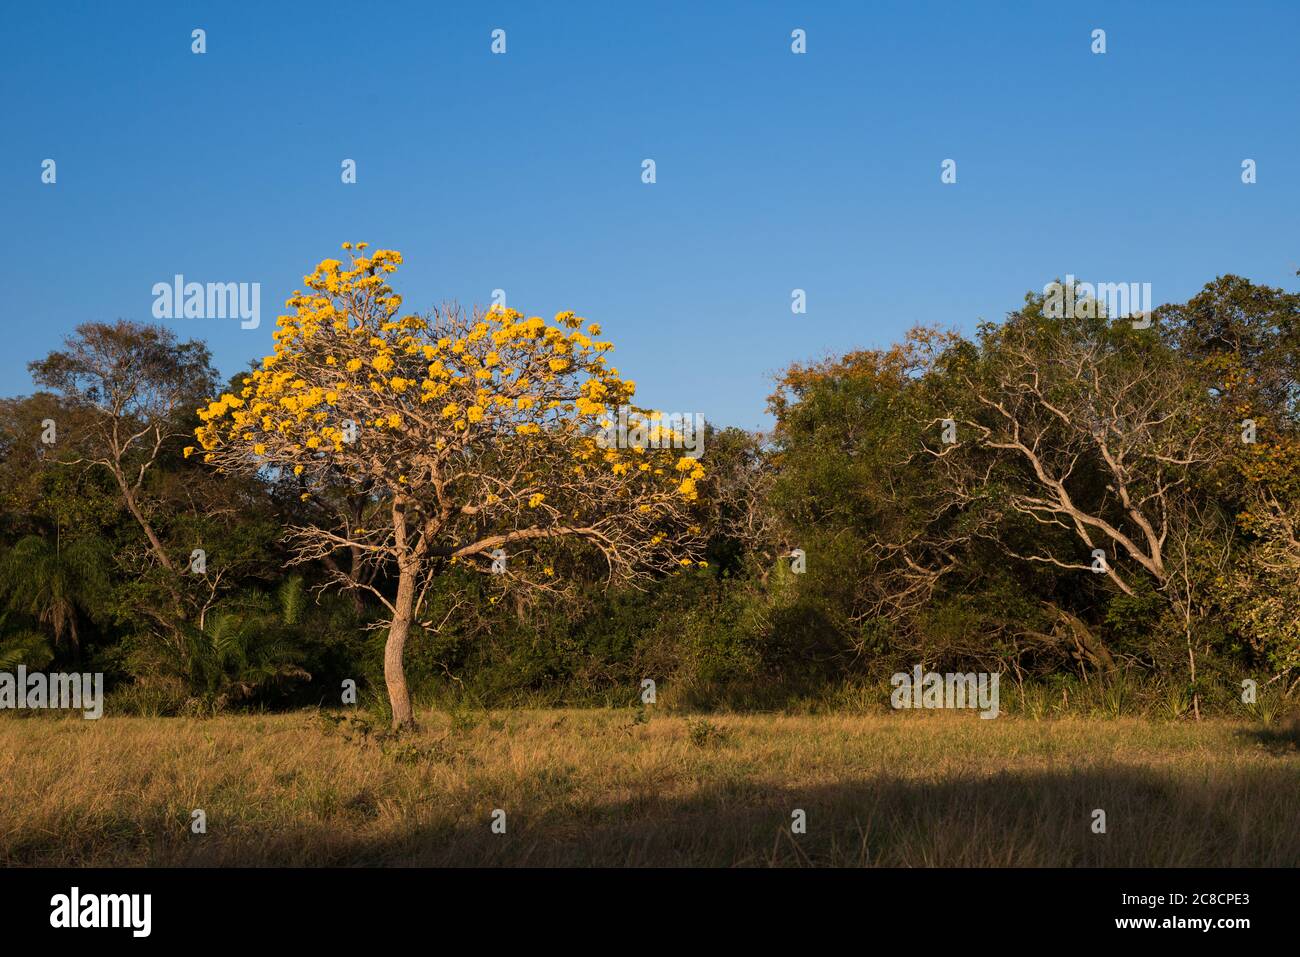 A Yellow Tabebuia tree in bloom, at South Pantanal, Brazil Stock Photo